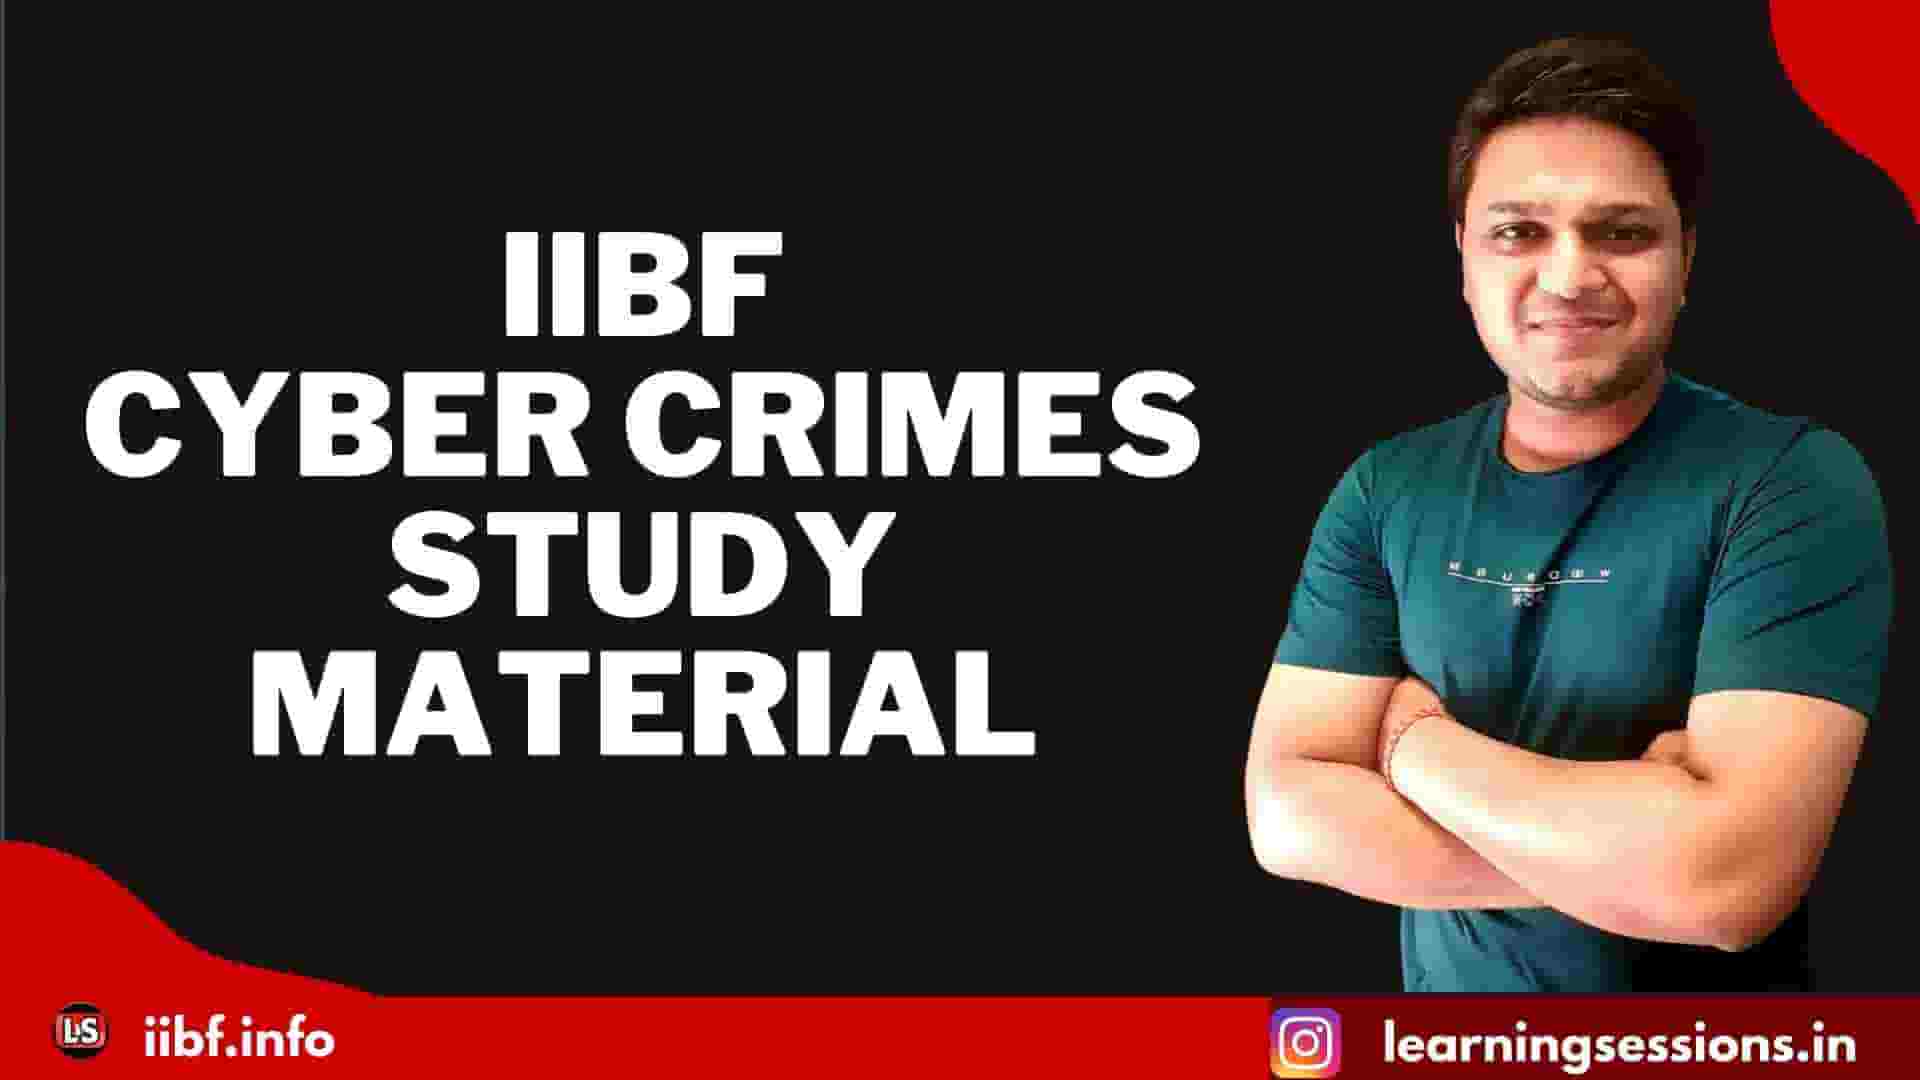 IIBF CYBER CRIMES AND FRAUD MANAGEMENT STUDY MATERIAL 2022